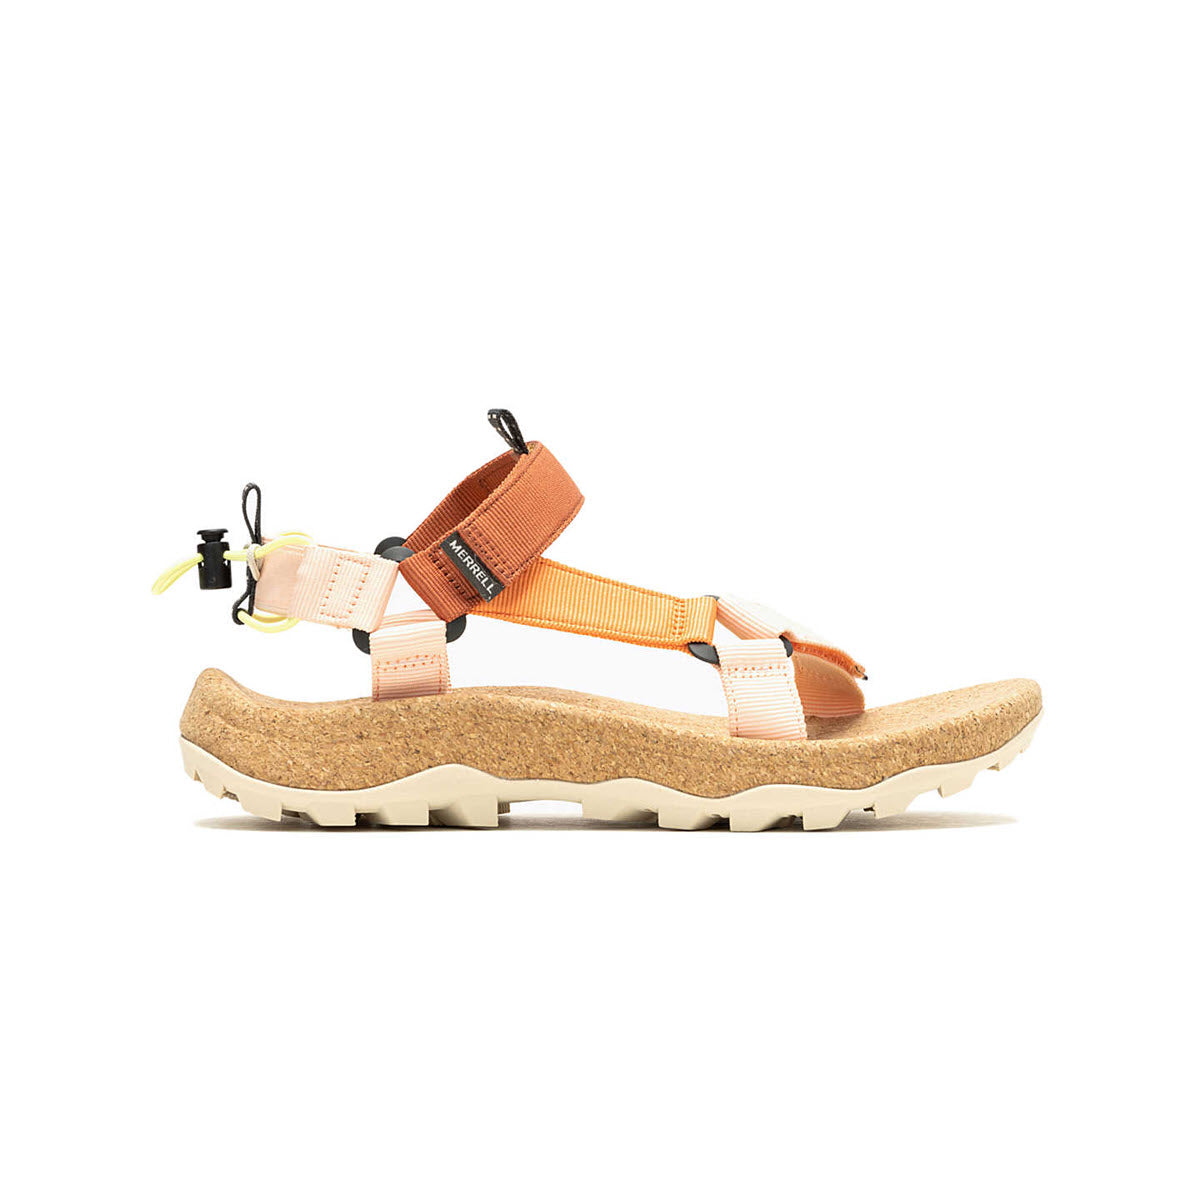 A single Merrell orange sport sandal with adjustable straps featuring a hook and loop closure and a chunky beige sole, displayed on a white background.